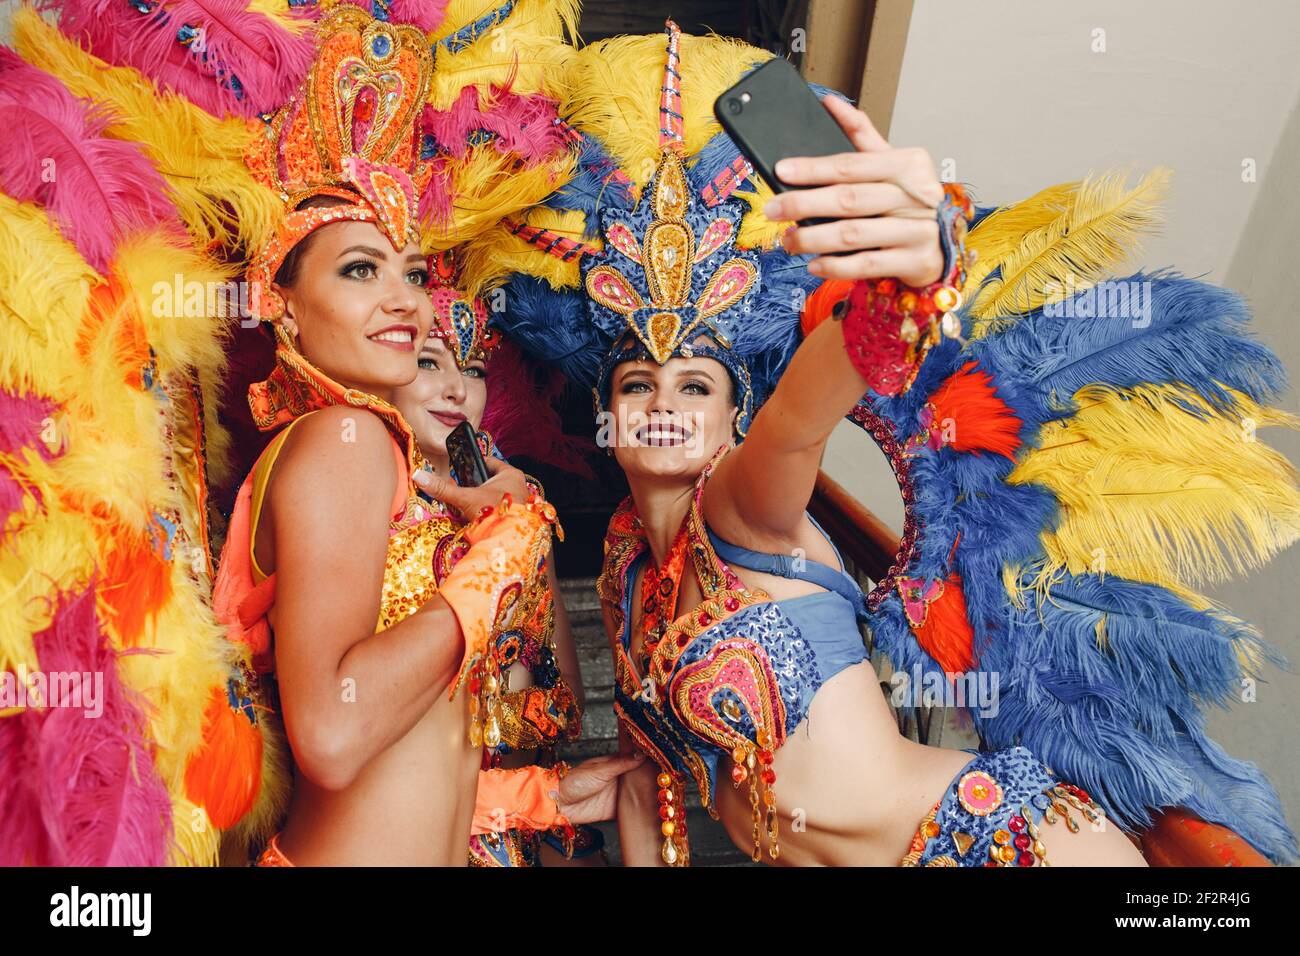 Woman in brazilian samba carnival costume with colorful feathers plumage  with mobile phone take selfie in old entrance with big window Stock Photo -  Alamy